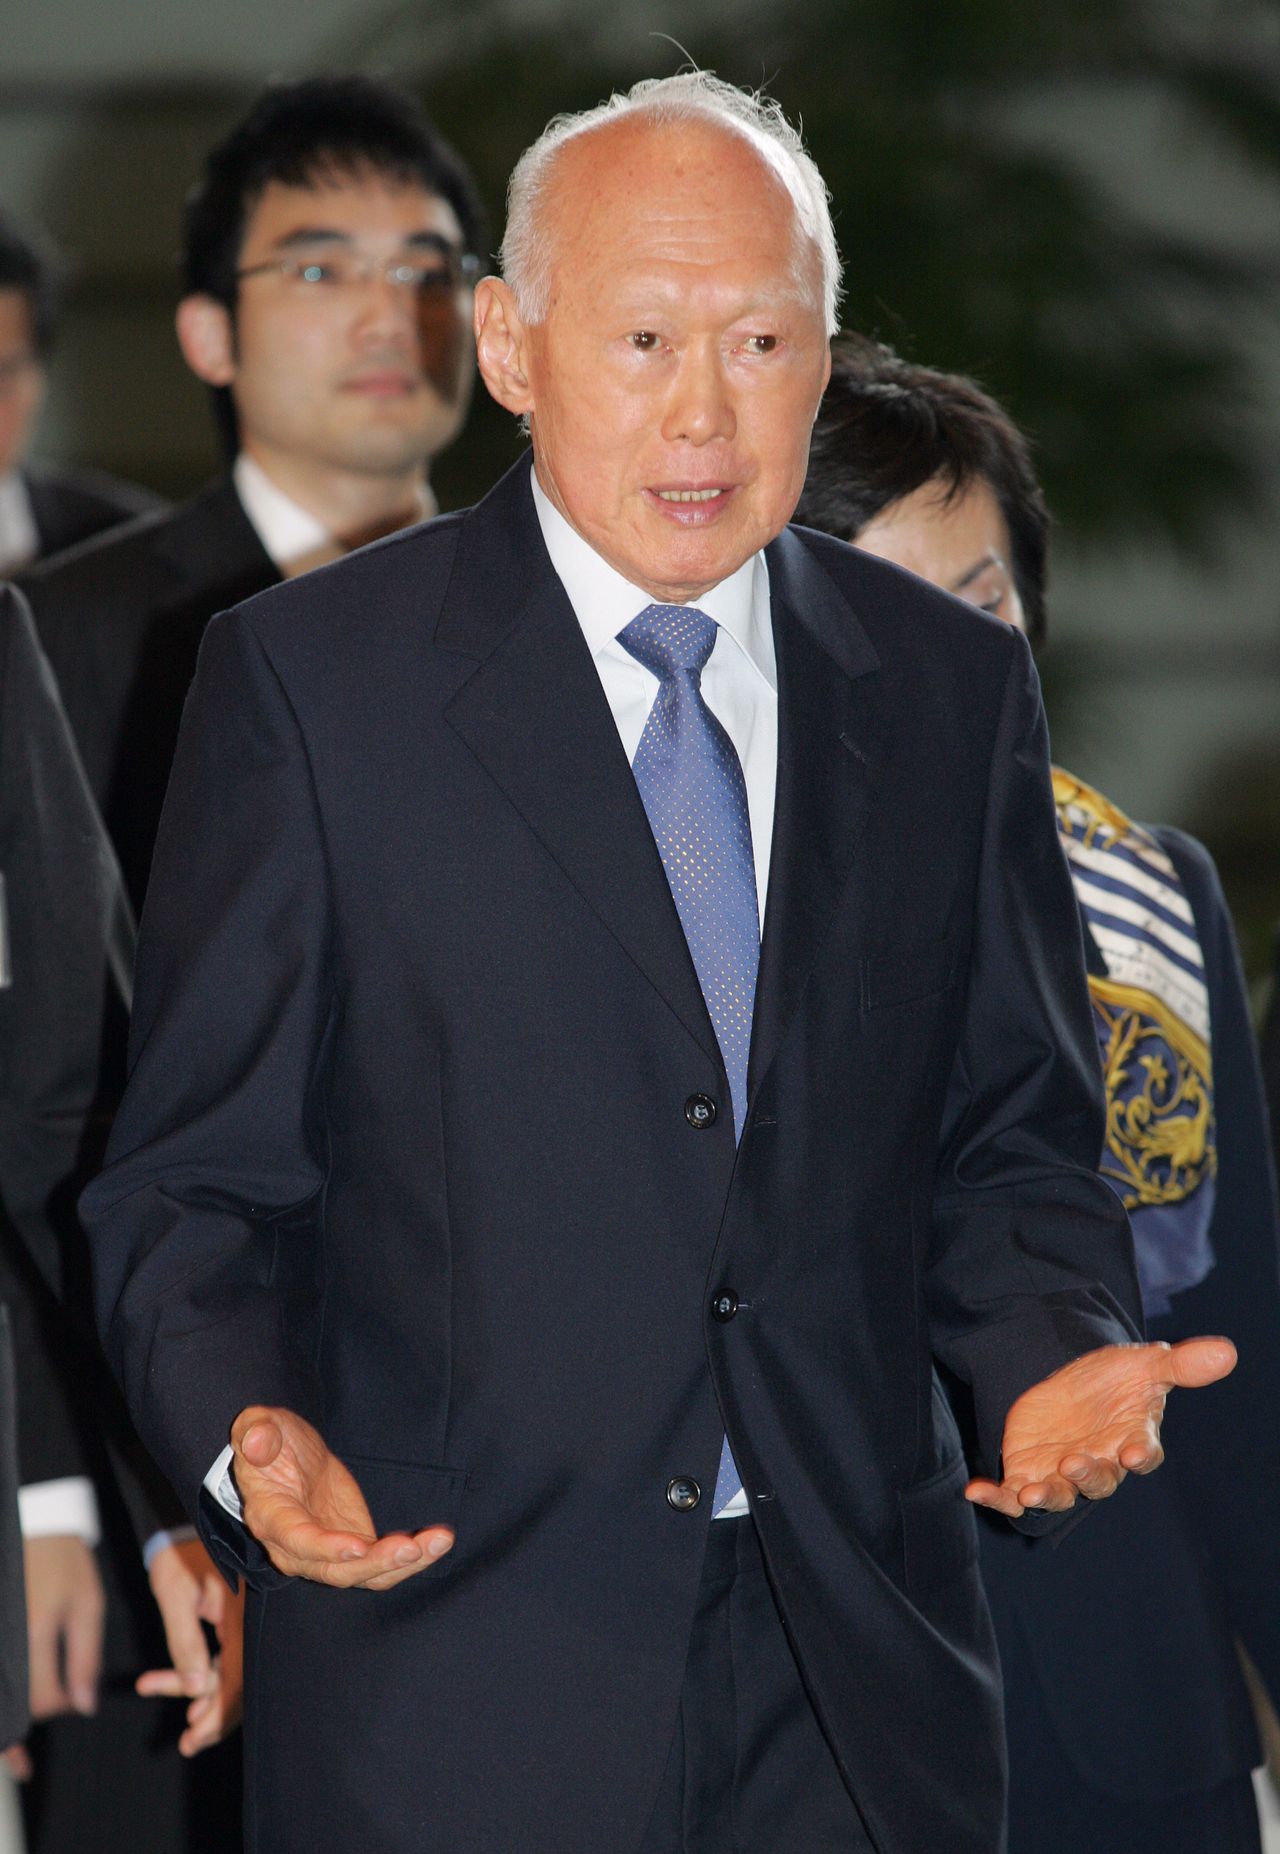 Former Singaporean Prime Minister Lee Kuan Yew, photographed in May 2007. (© Jiji)